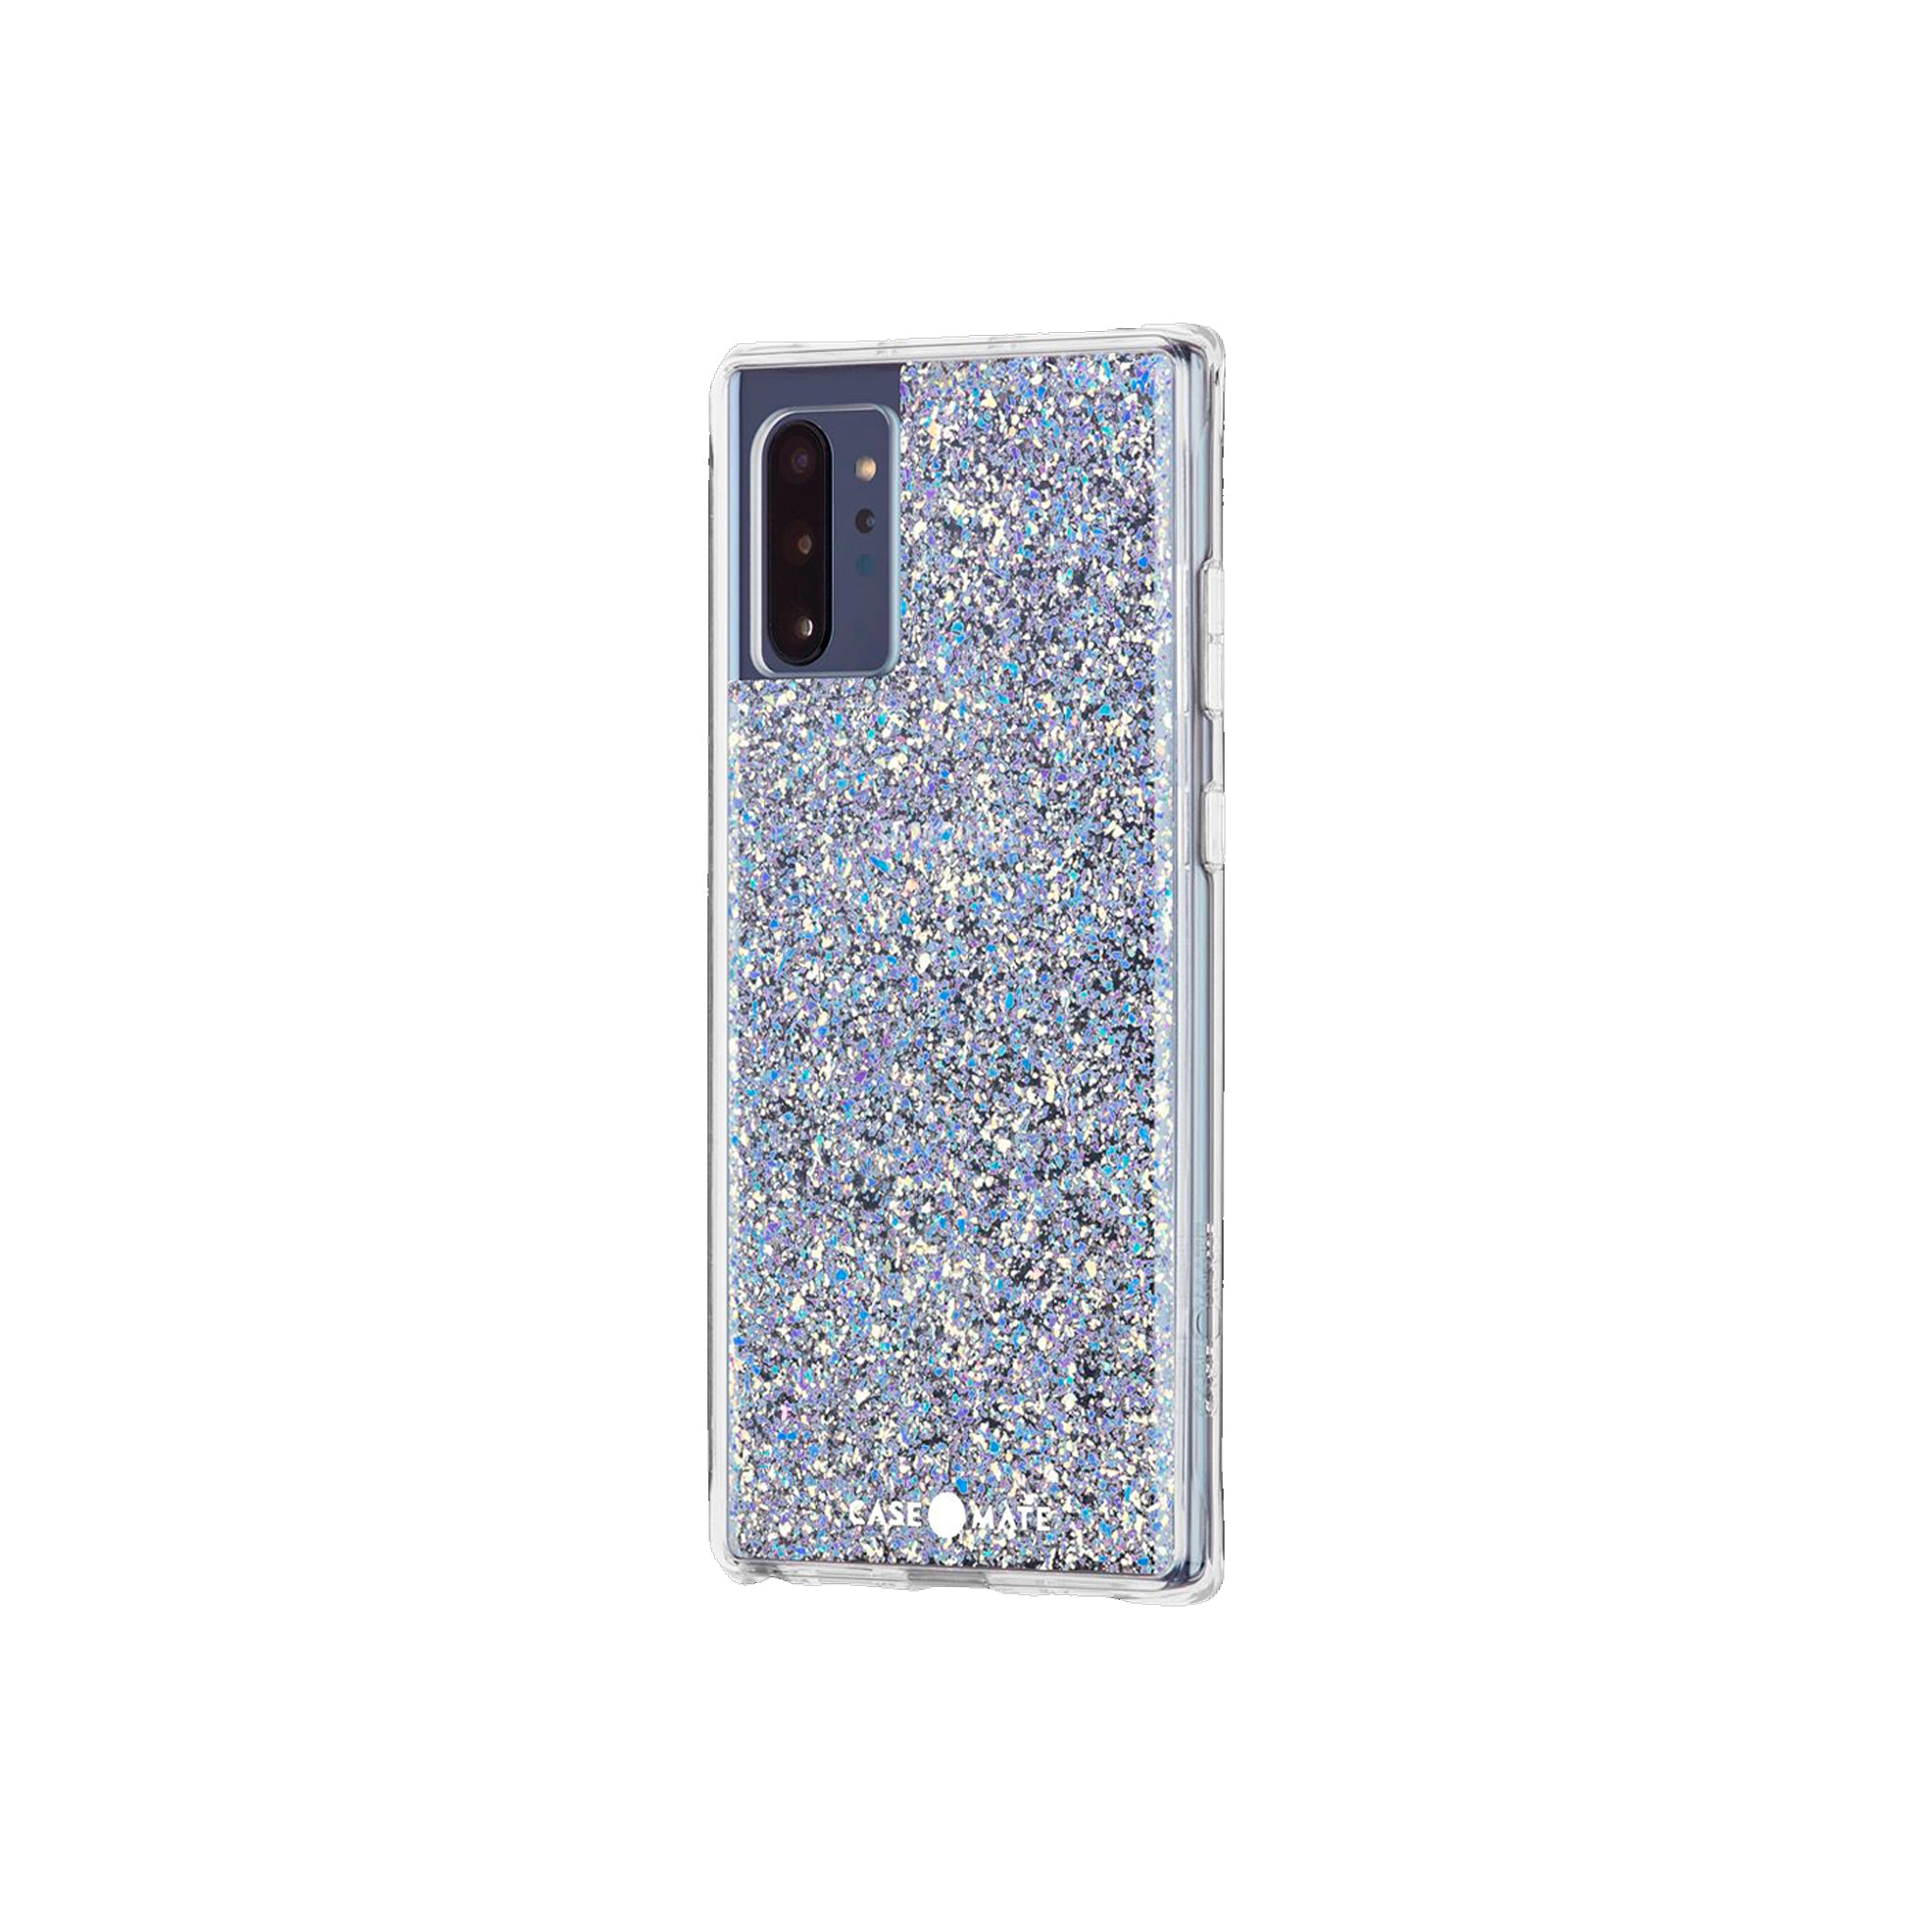 Case-mate - Twinkle Case For Samsung Galaxy Note10 Plus - Stardust